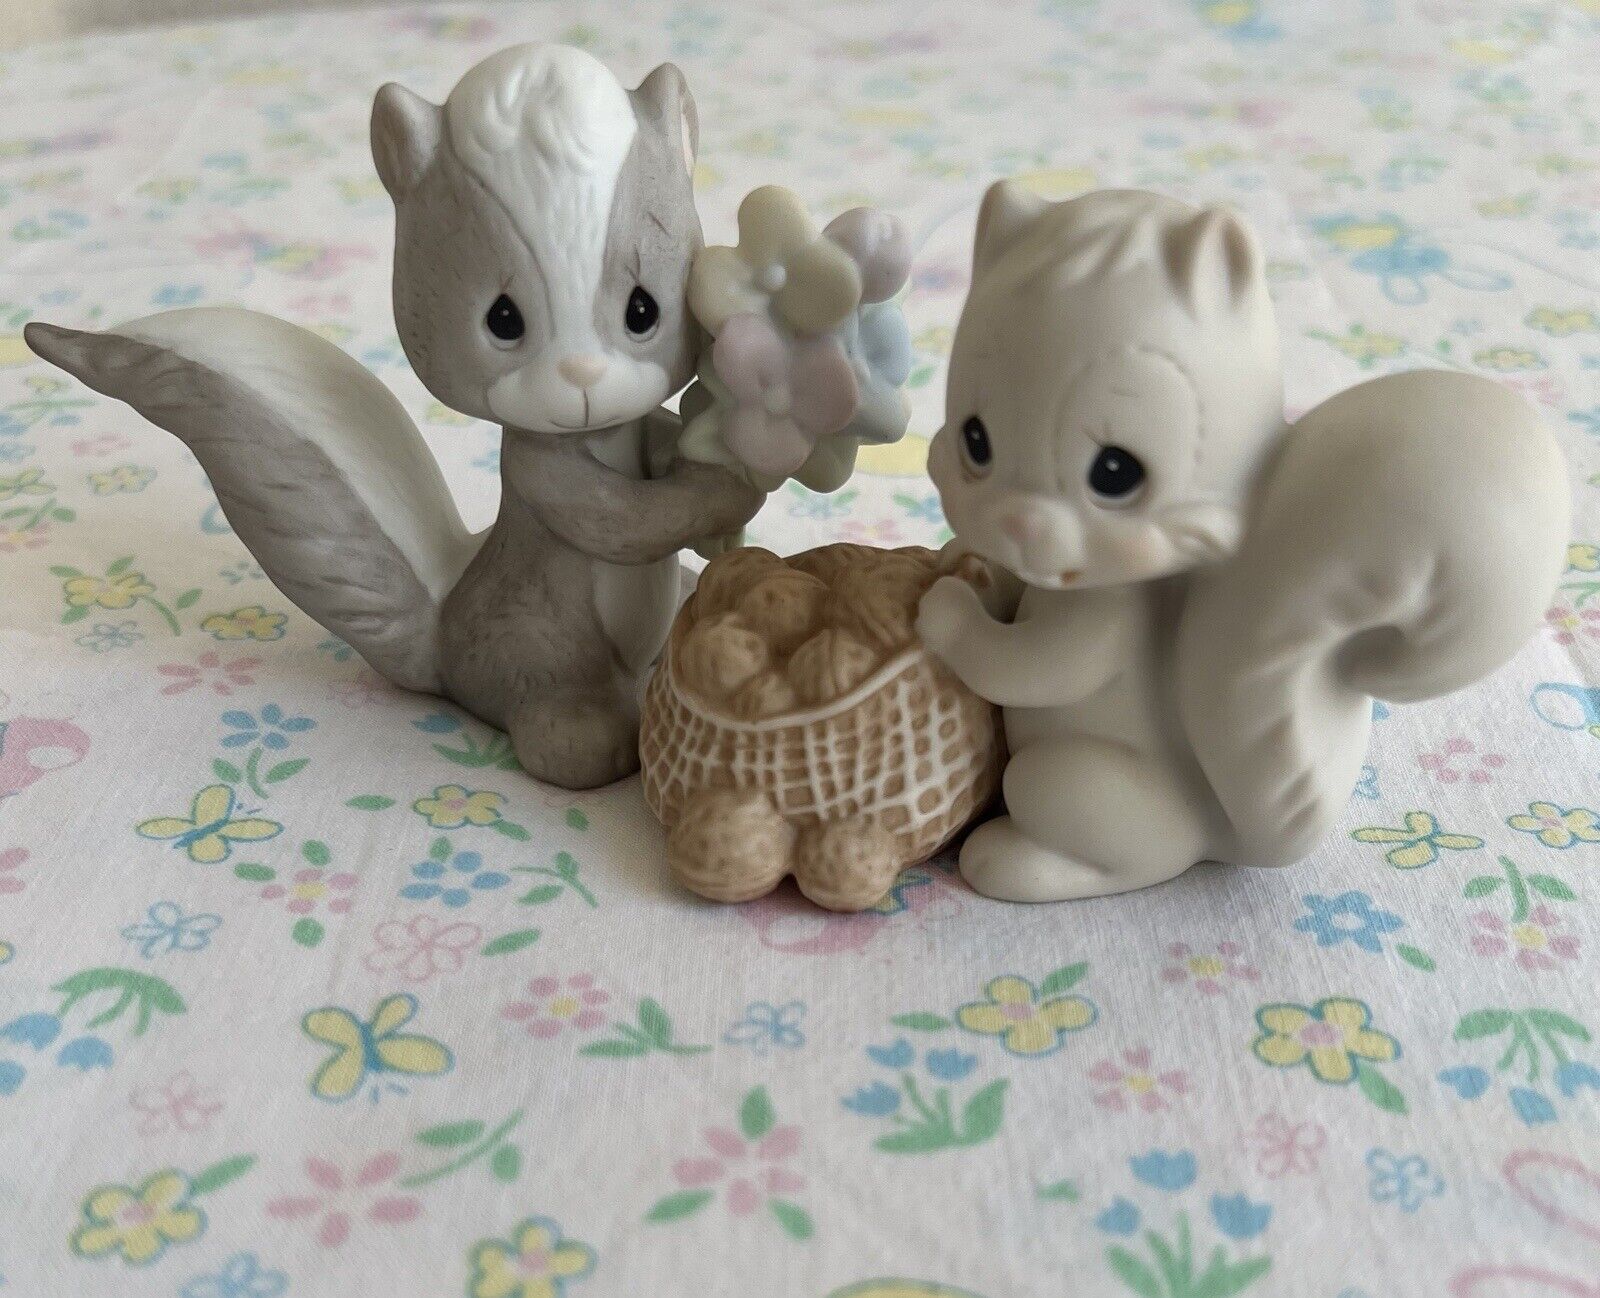  Precious Moments Vintage 1990 Members Only Skunk/Squirrel Figurines Collectible